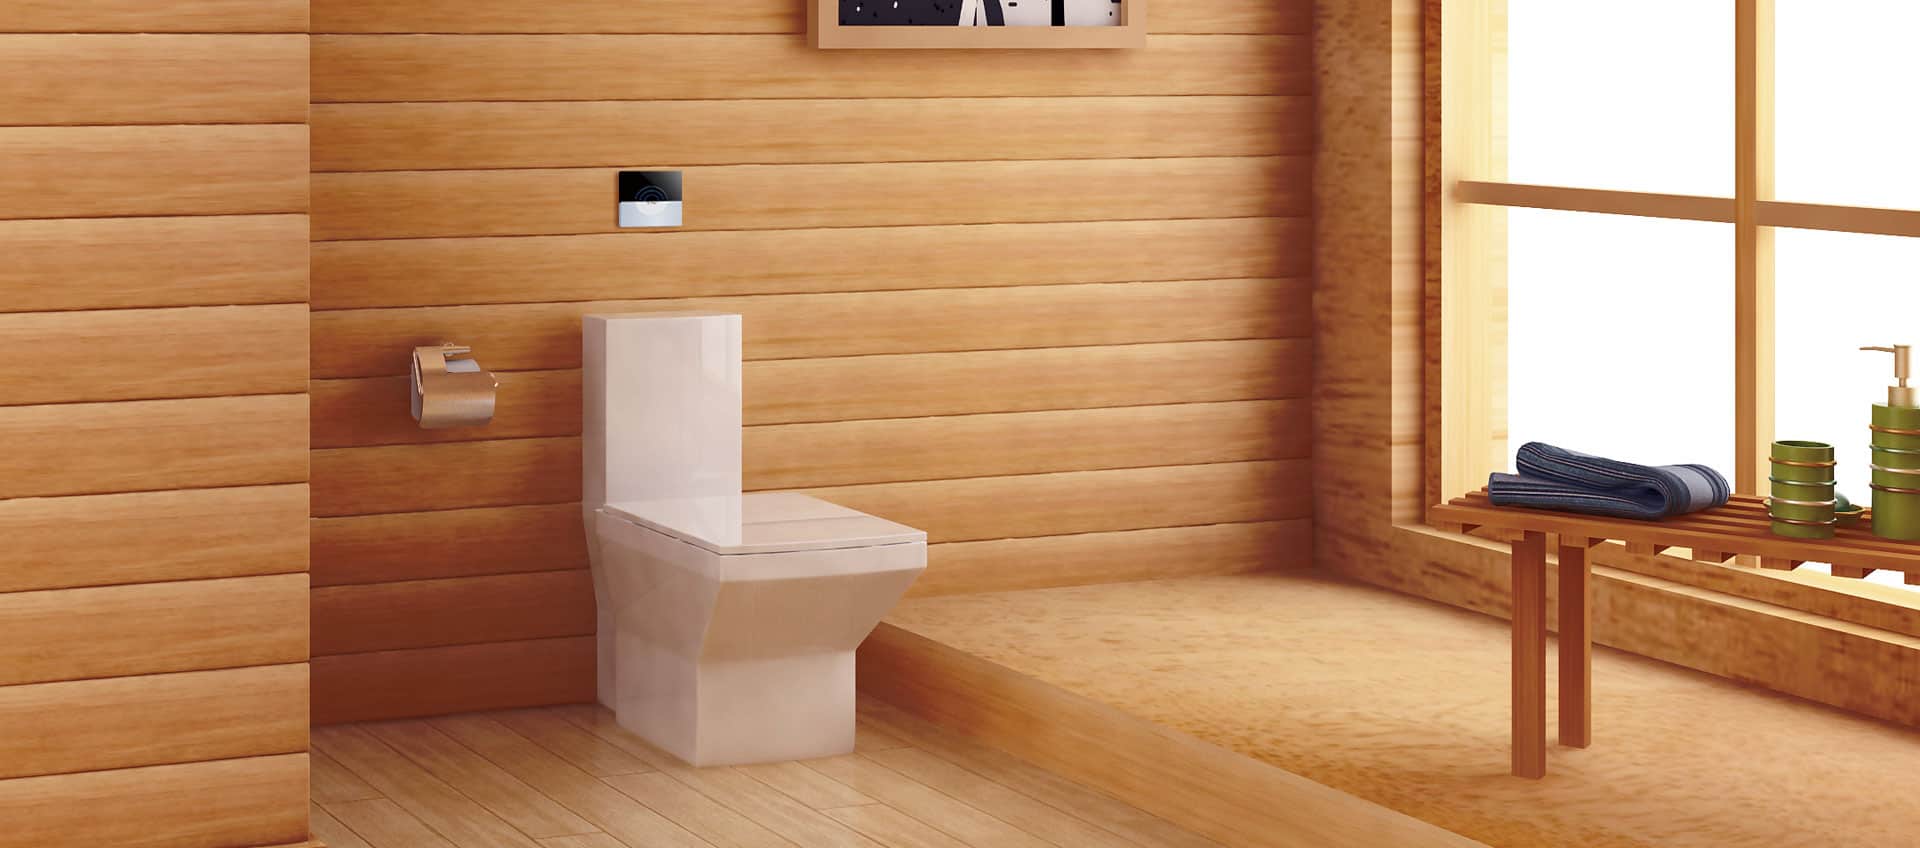 Automatic Touchless Microvave Sensor Toilet Flusher